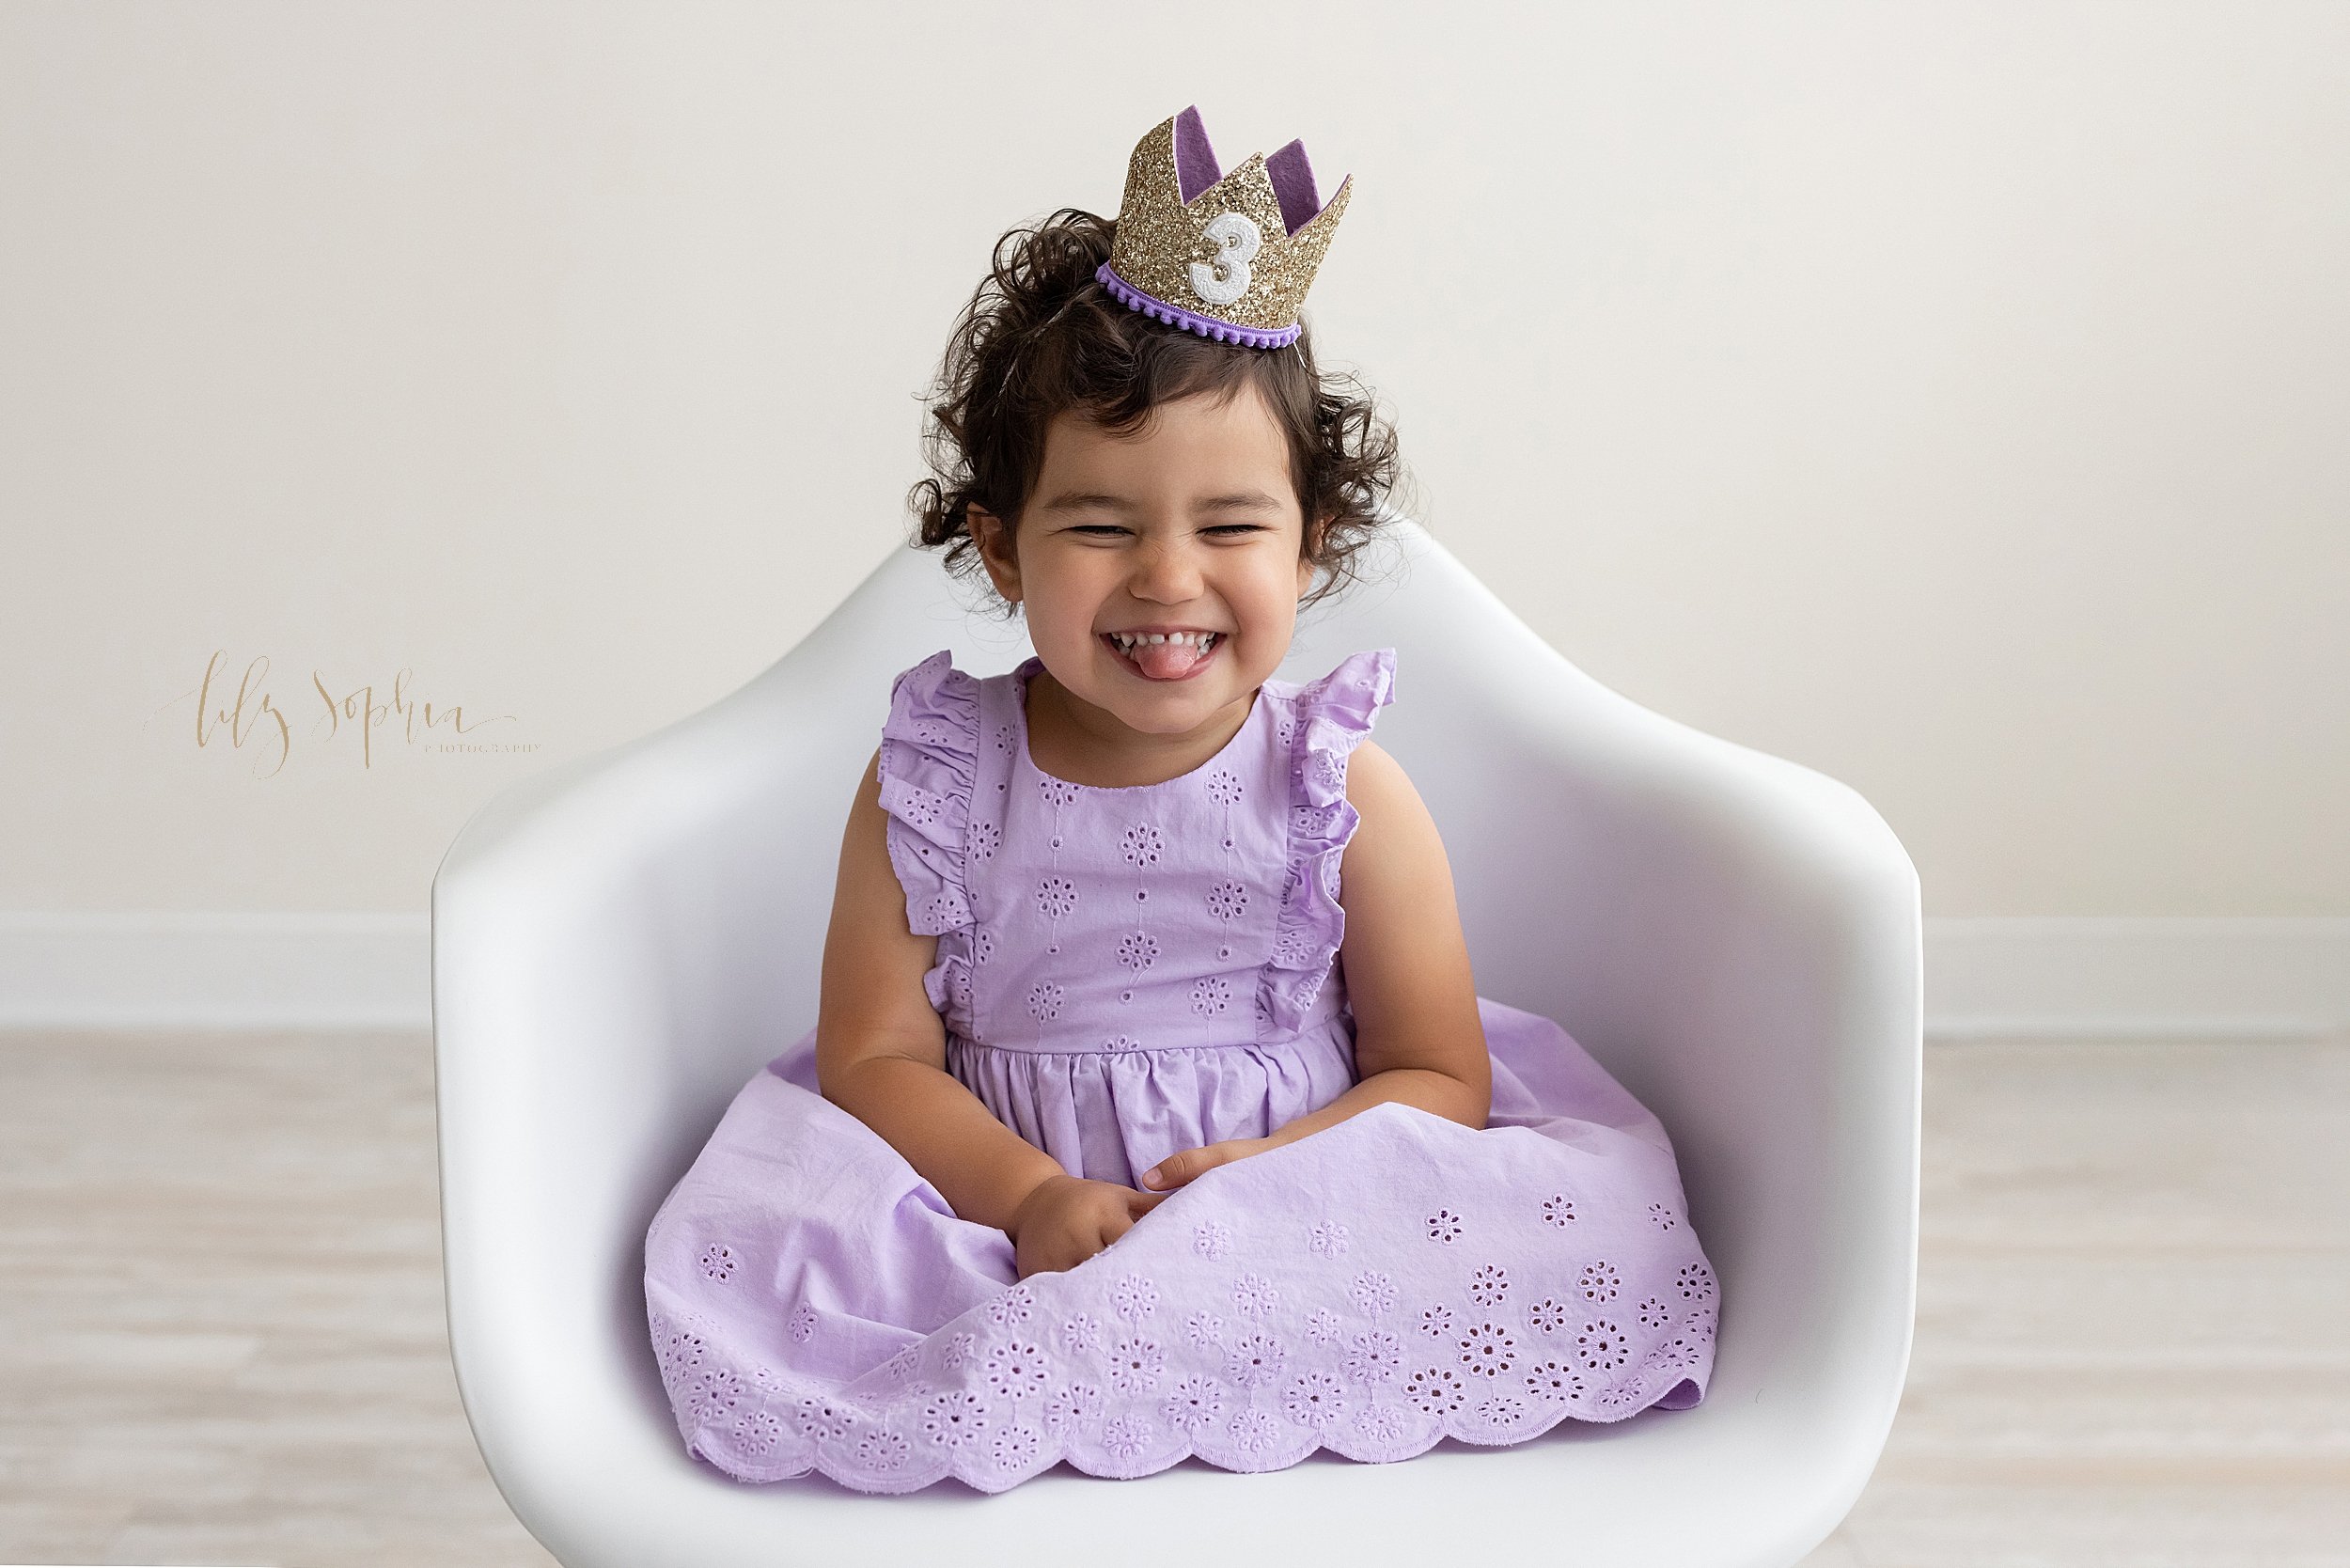  Birthday portrait of a three year old little girl sitting a  white molded chair wearing a lilac eyelet dress and a number 3 crown on her head as she sticks out her tongue while giggling taken in a natural light studio near Brookhaven in Atlanta, Geo